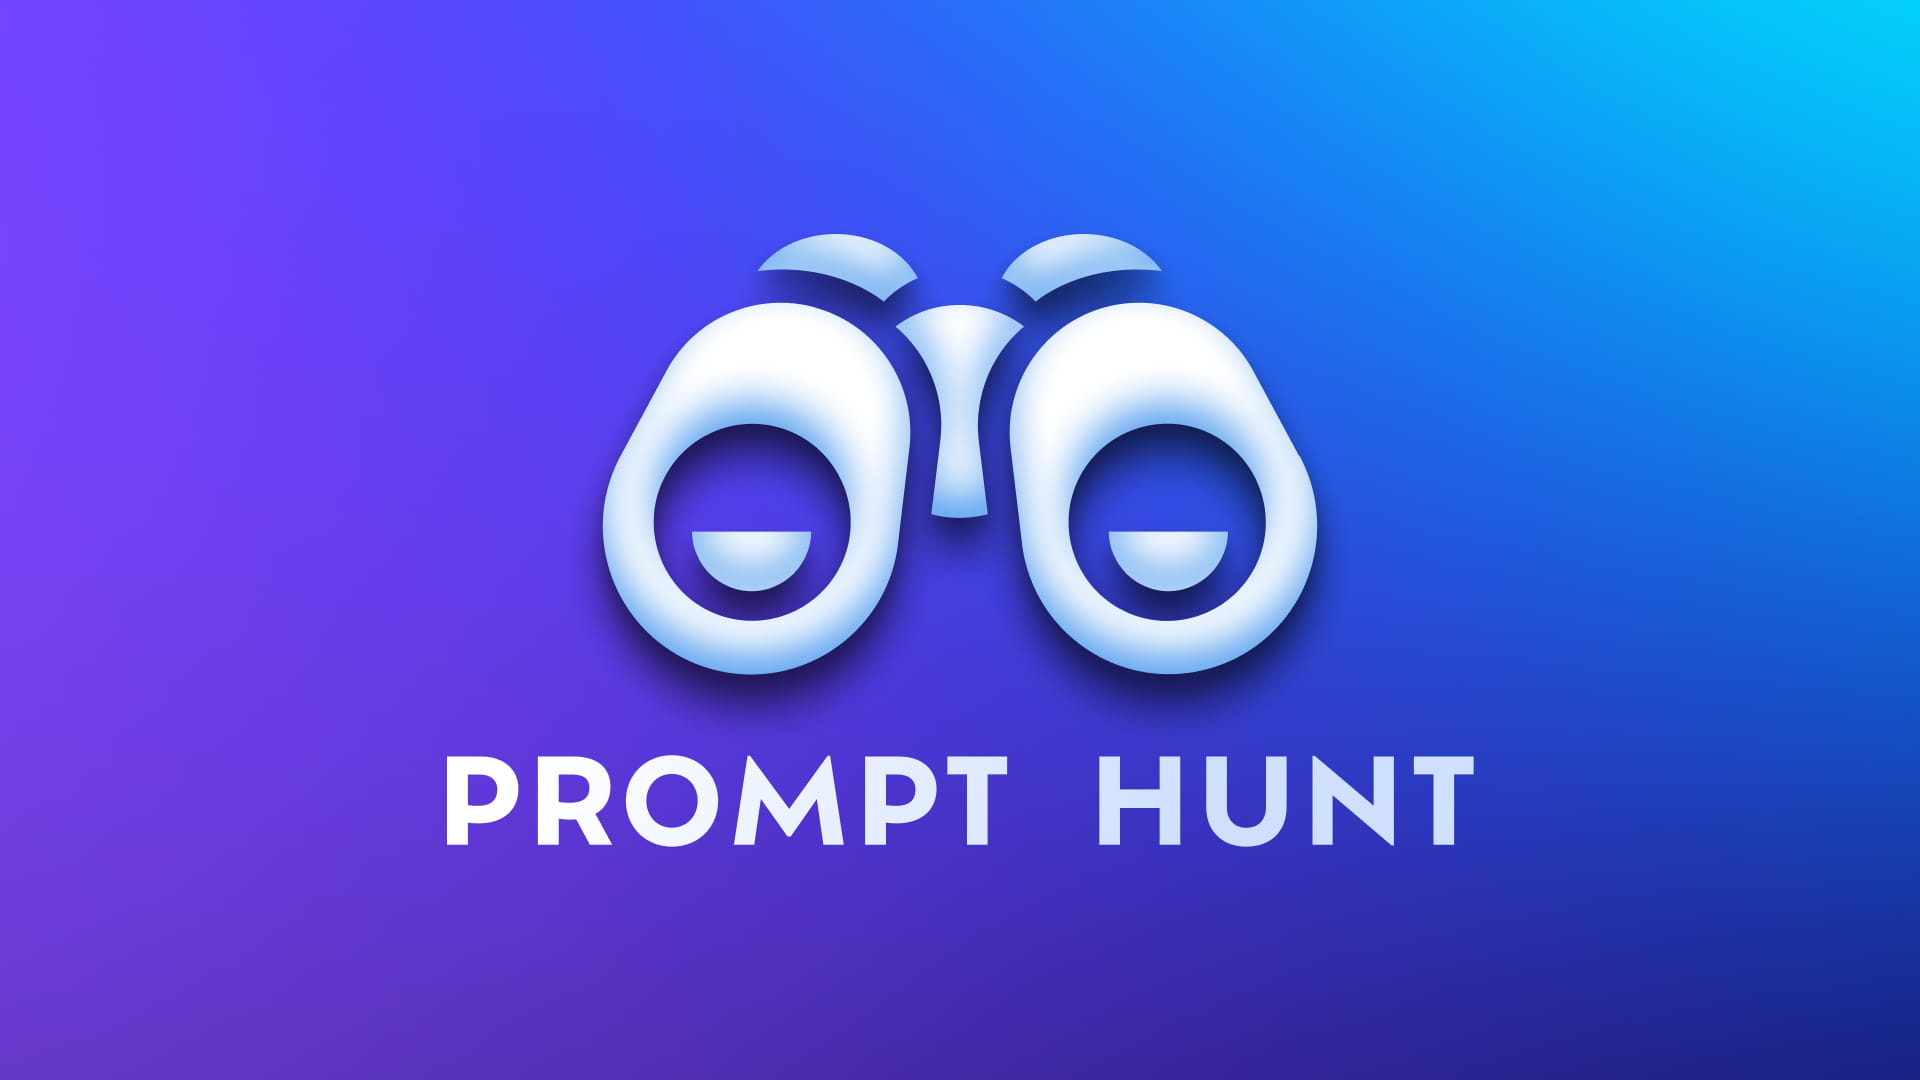 Prompt Hunt - A tool to create, edit and share consistent graphics assets and themes